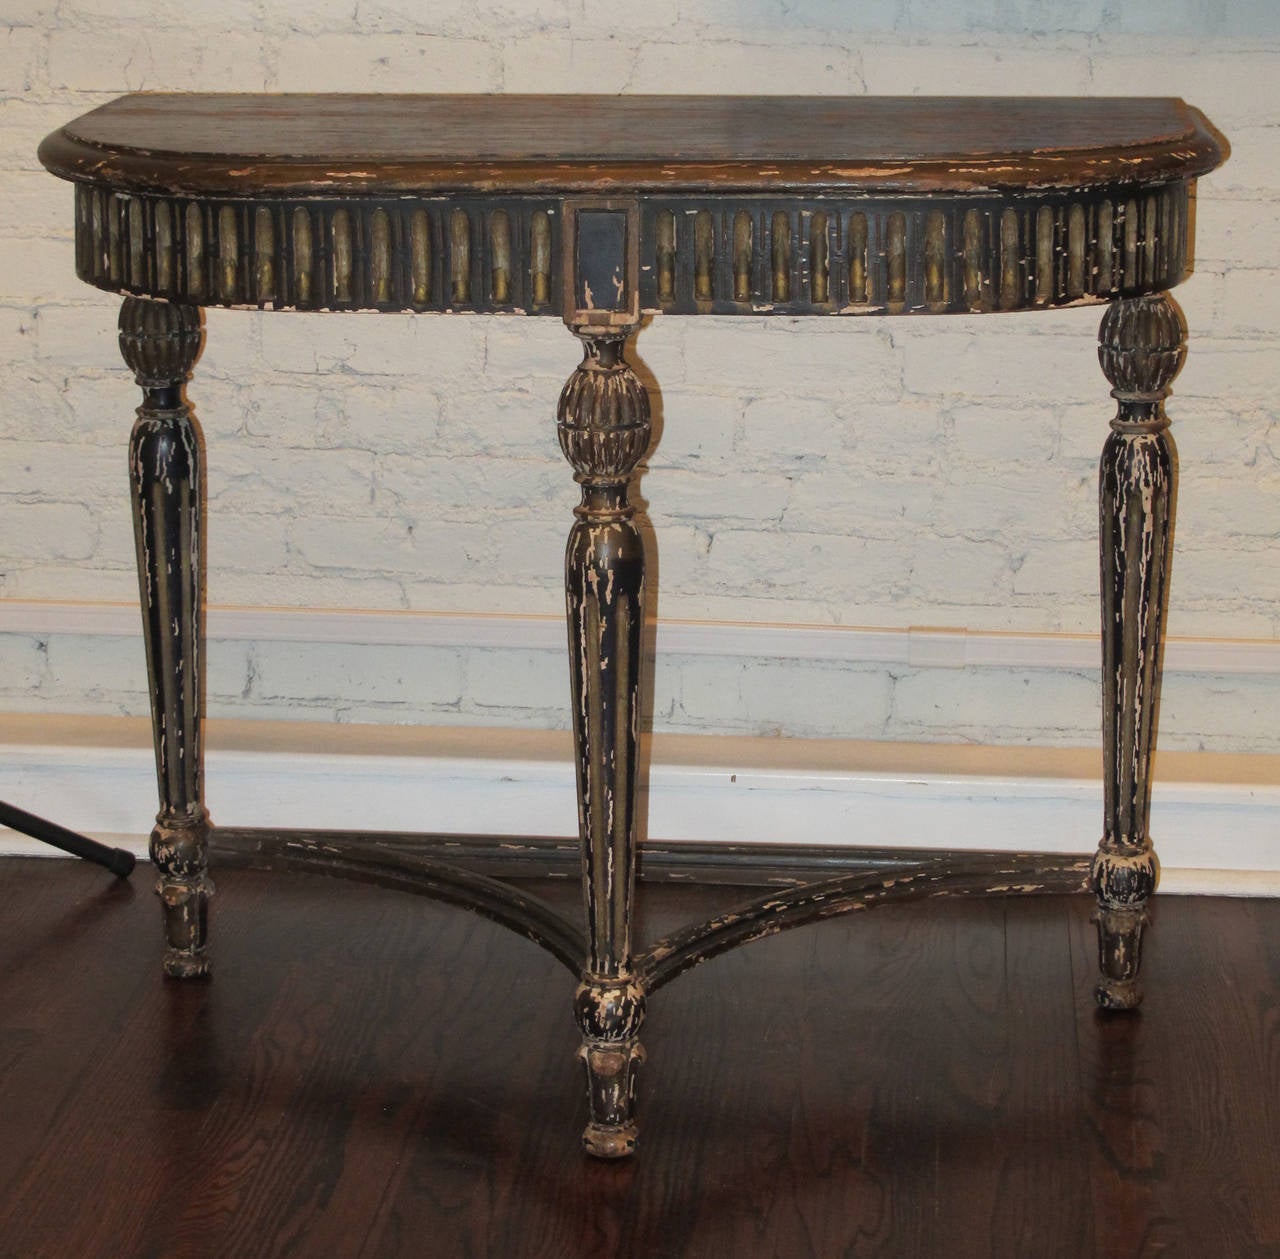 Midnight blue console table with losses to finish from age and use. Pleasant patina showing both the plaster beneath the paint and areas of the wooden structure. Table is very sturdy.